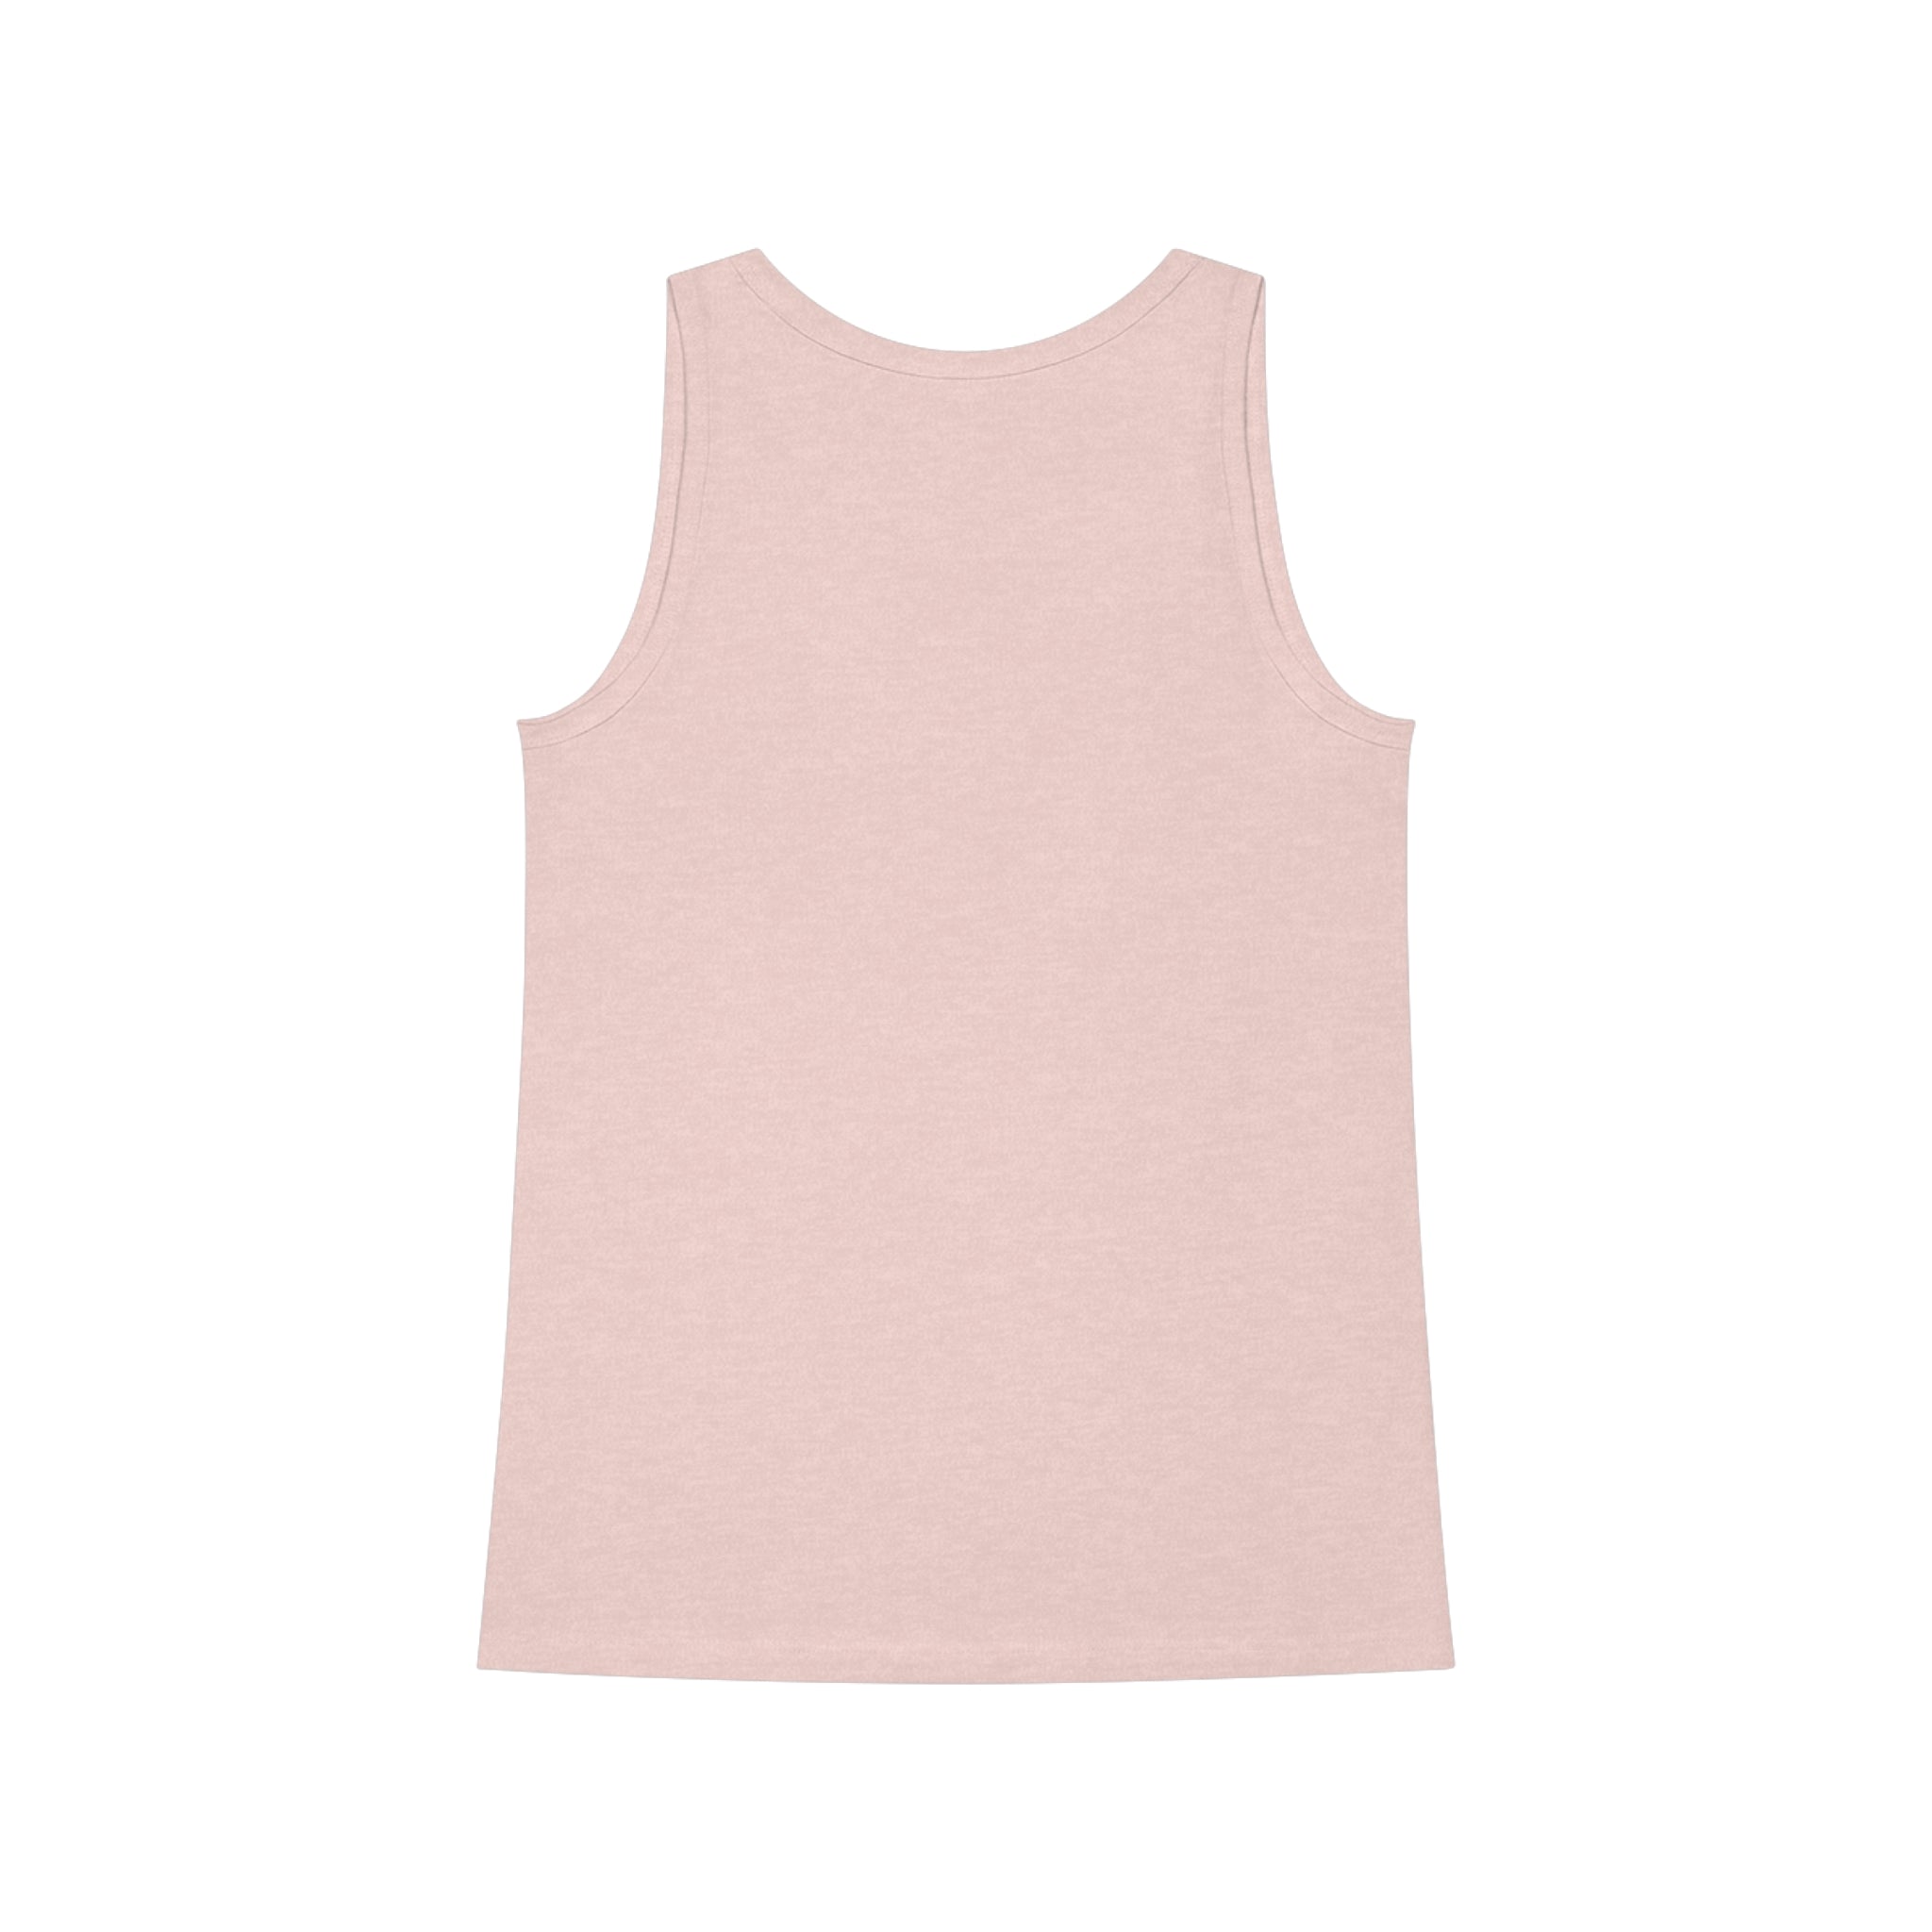 The Flower Boom Tank Top is an organic cotton women's pink tank top featuring a floral print on a white background. This Flower Boom Tank top adds a touch of femininity to any outfit.